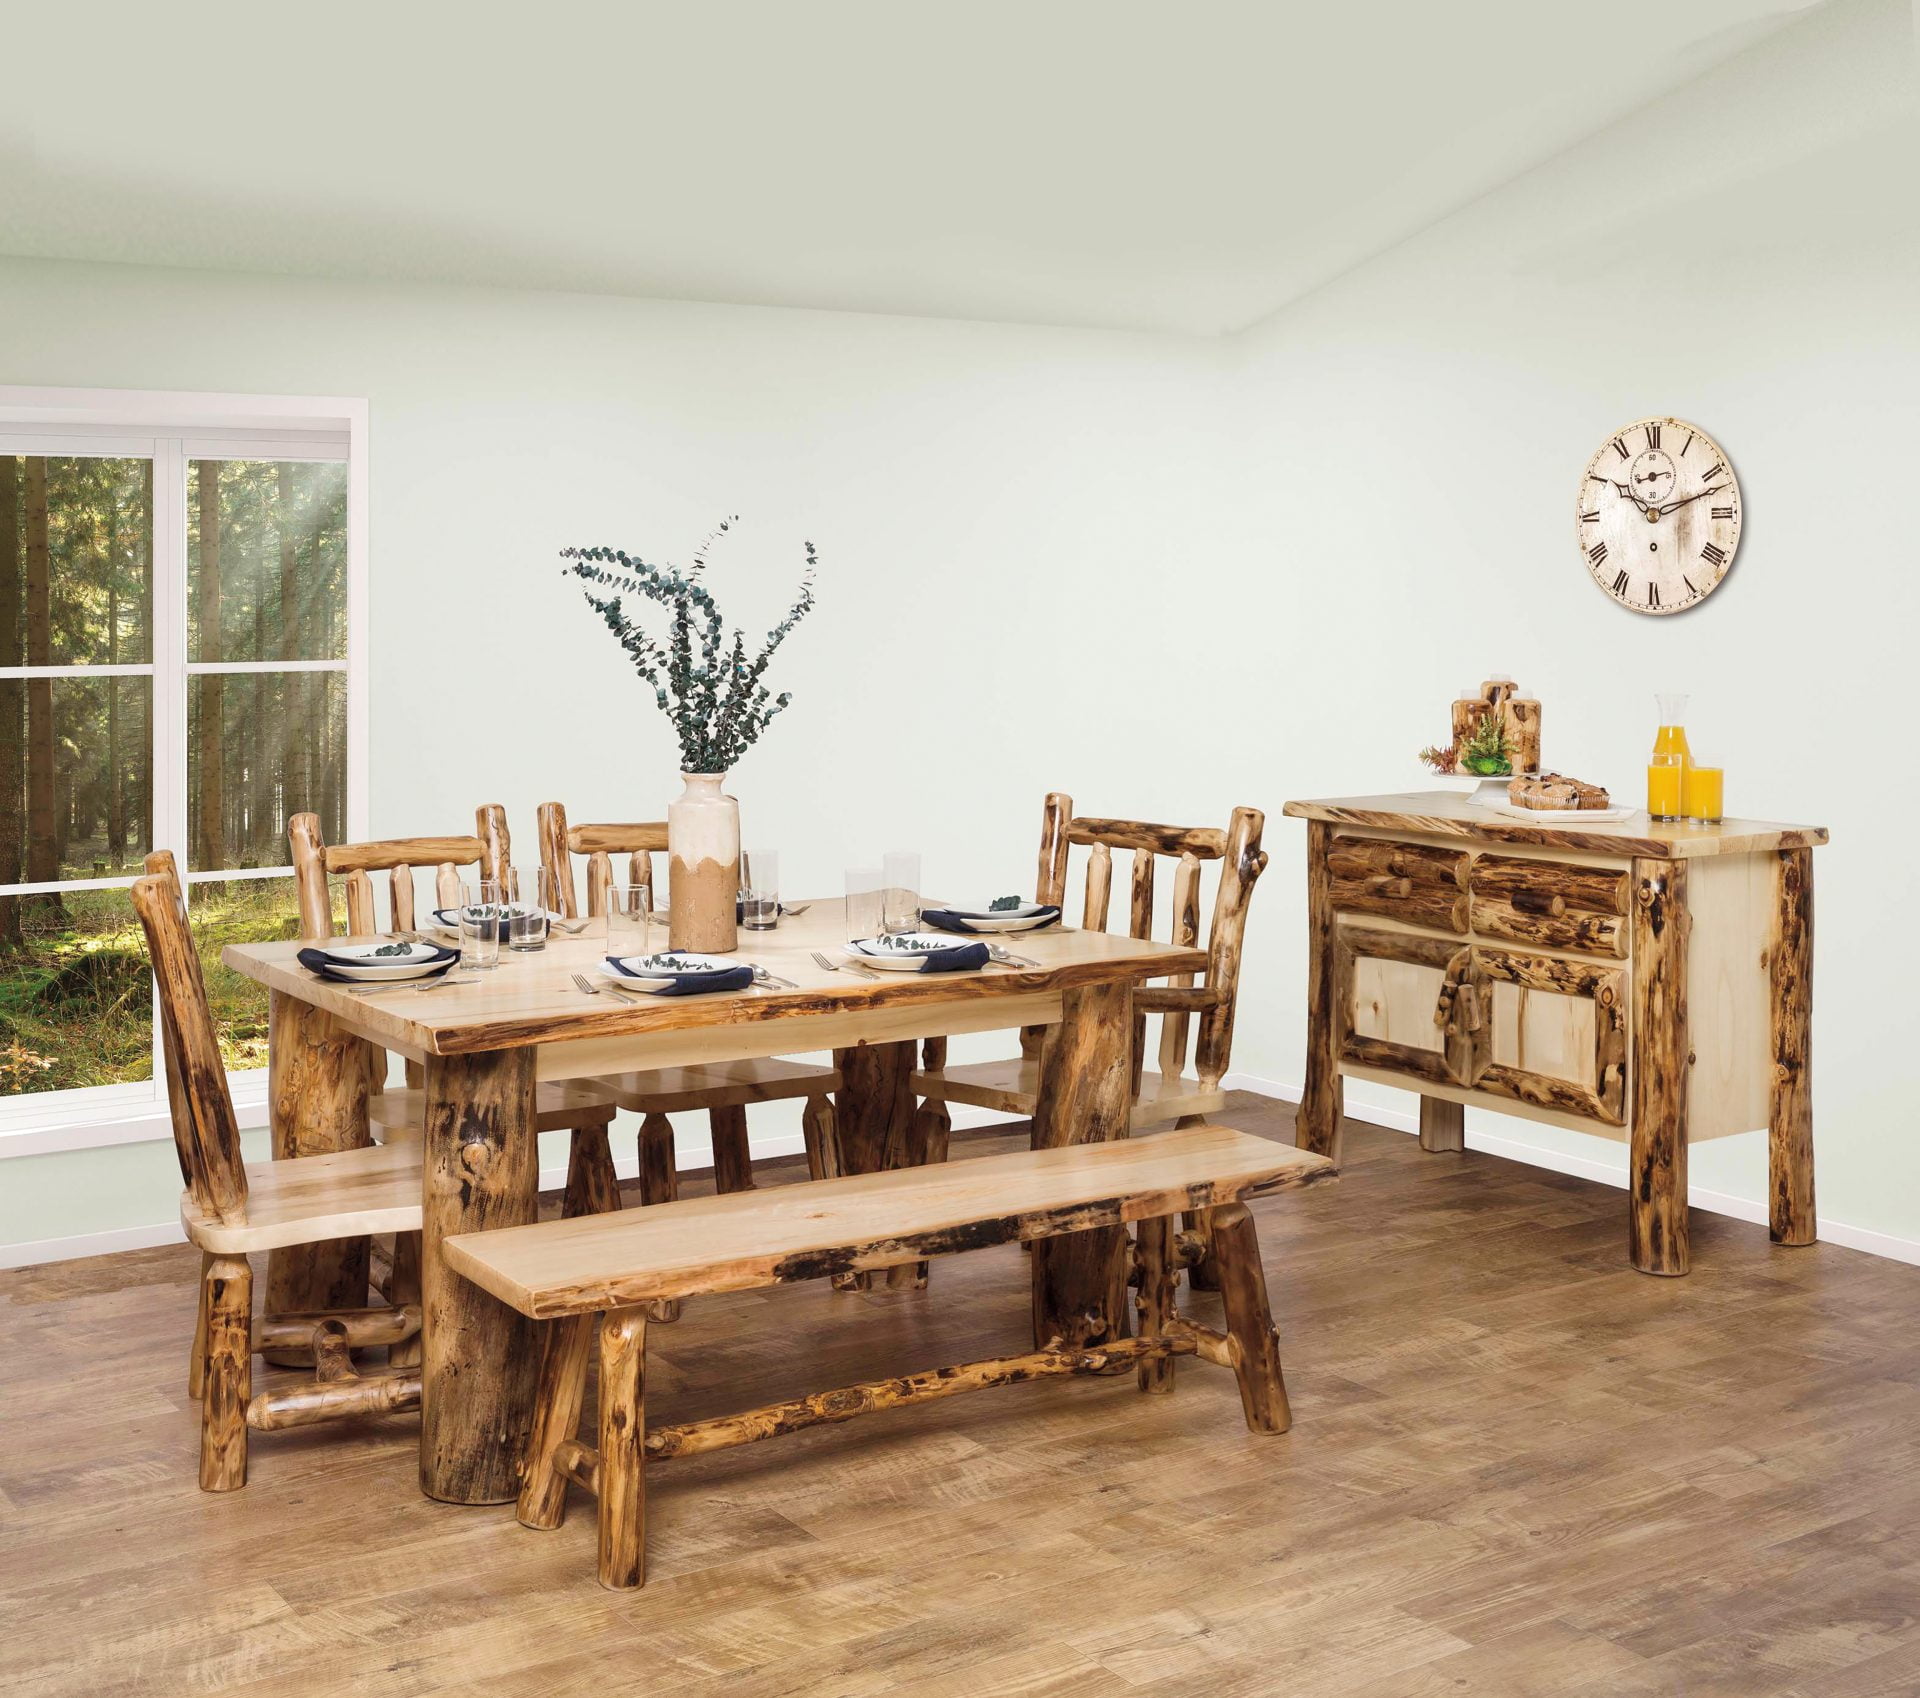 Rustic Aspen Log Dining Table with 4 Side Chairs